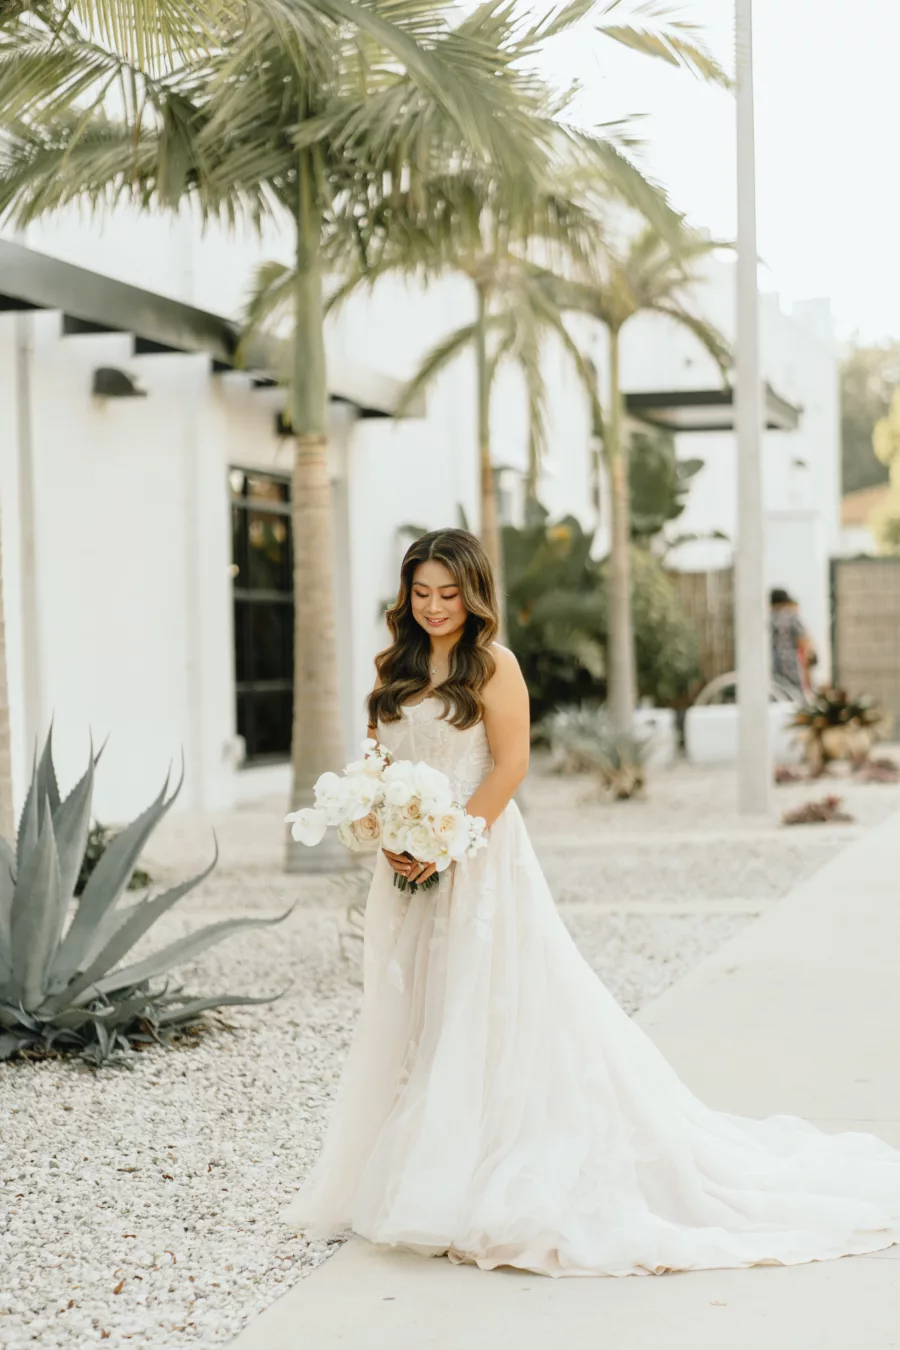 White Monochromatic Bridal Bouquet with Orchids and Roses Ideas | Ivory Strapless Lace A-Line Wedding Dress Inspiration | Lakeland Photographer and Videographer J&S Media